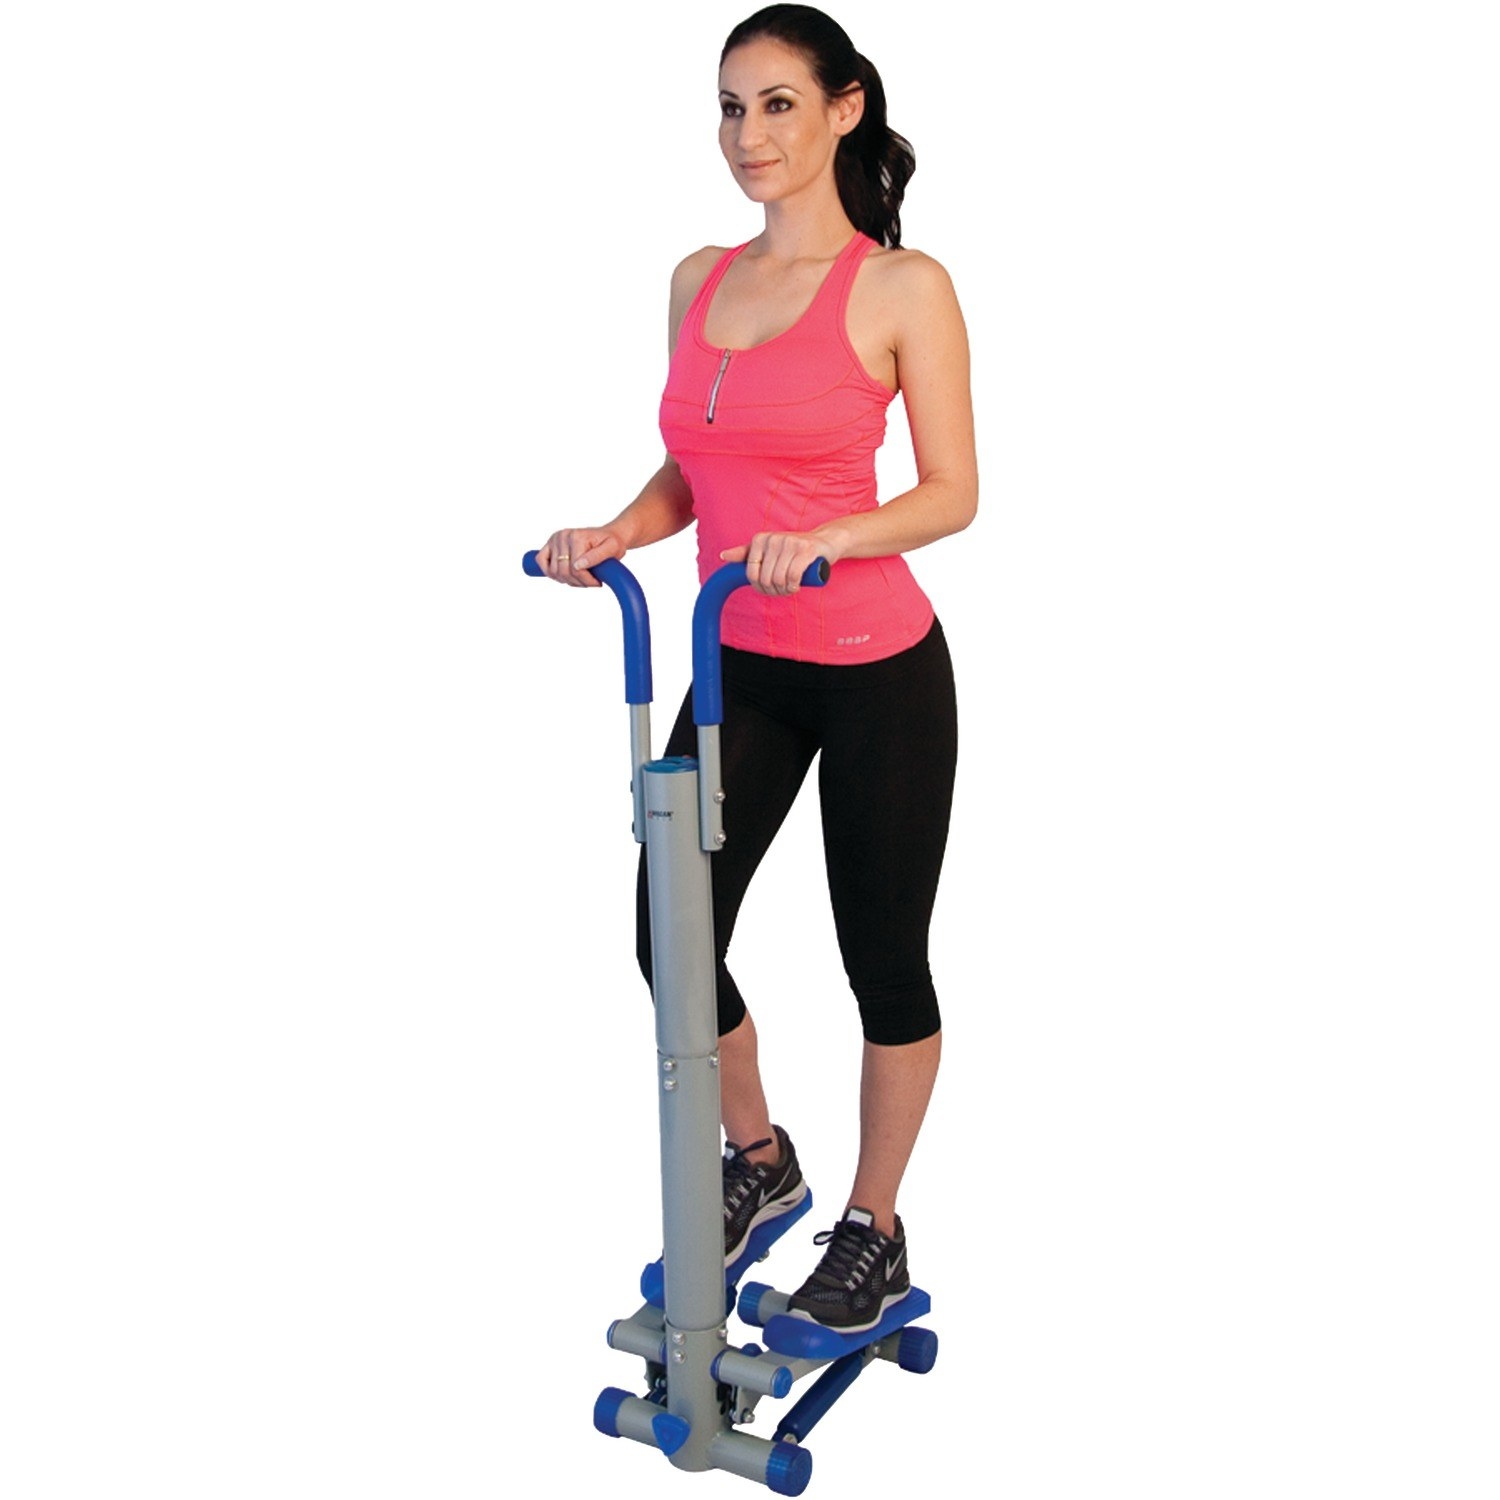 Model standing and using the mini stepper while balancing with its handles 